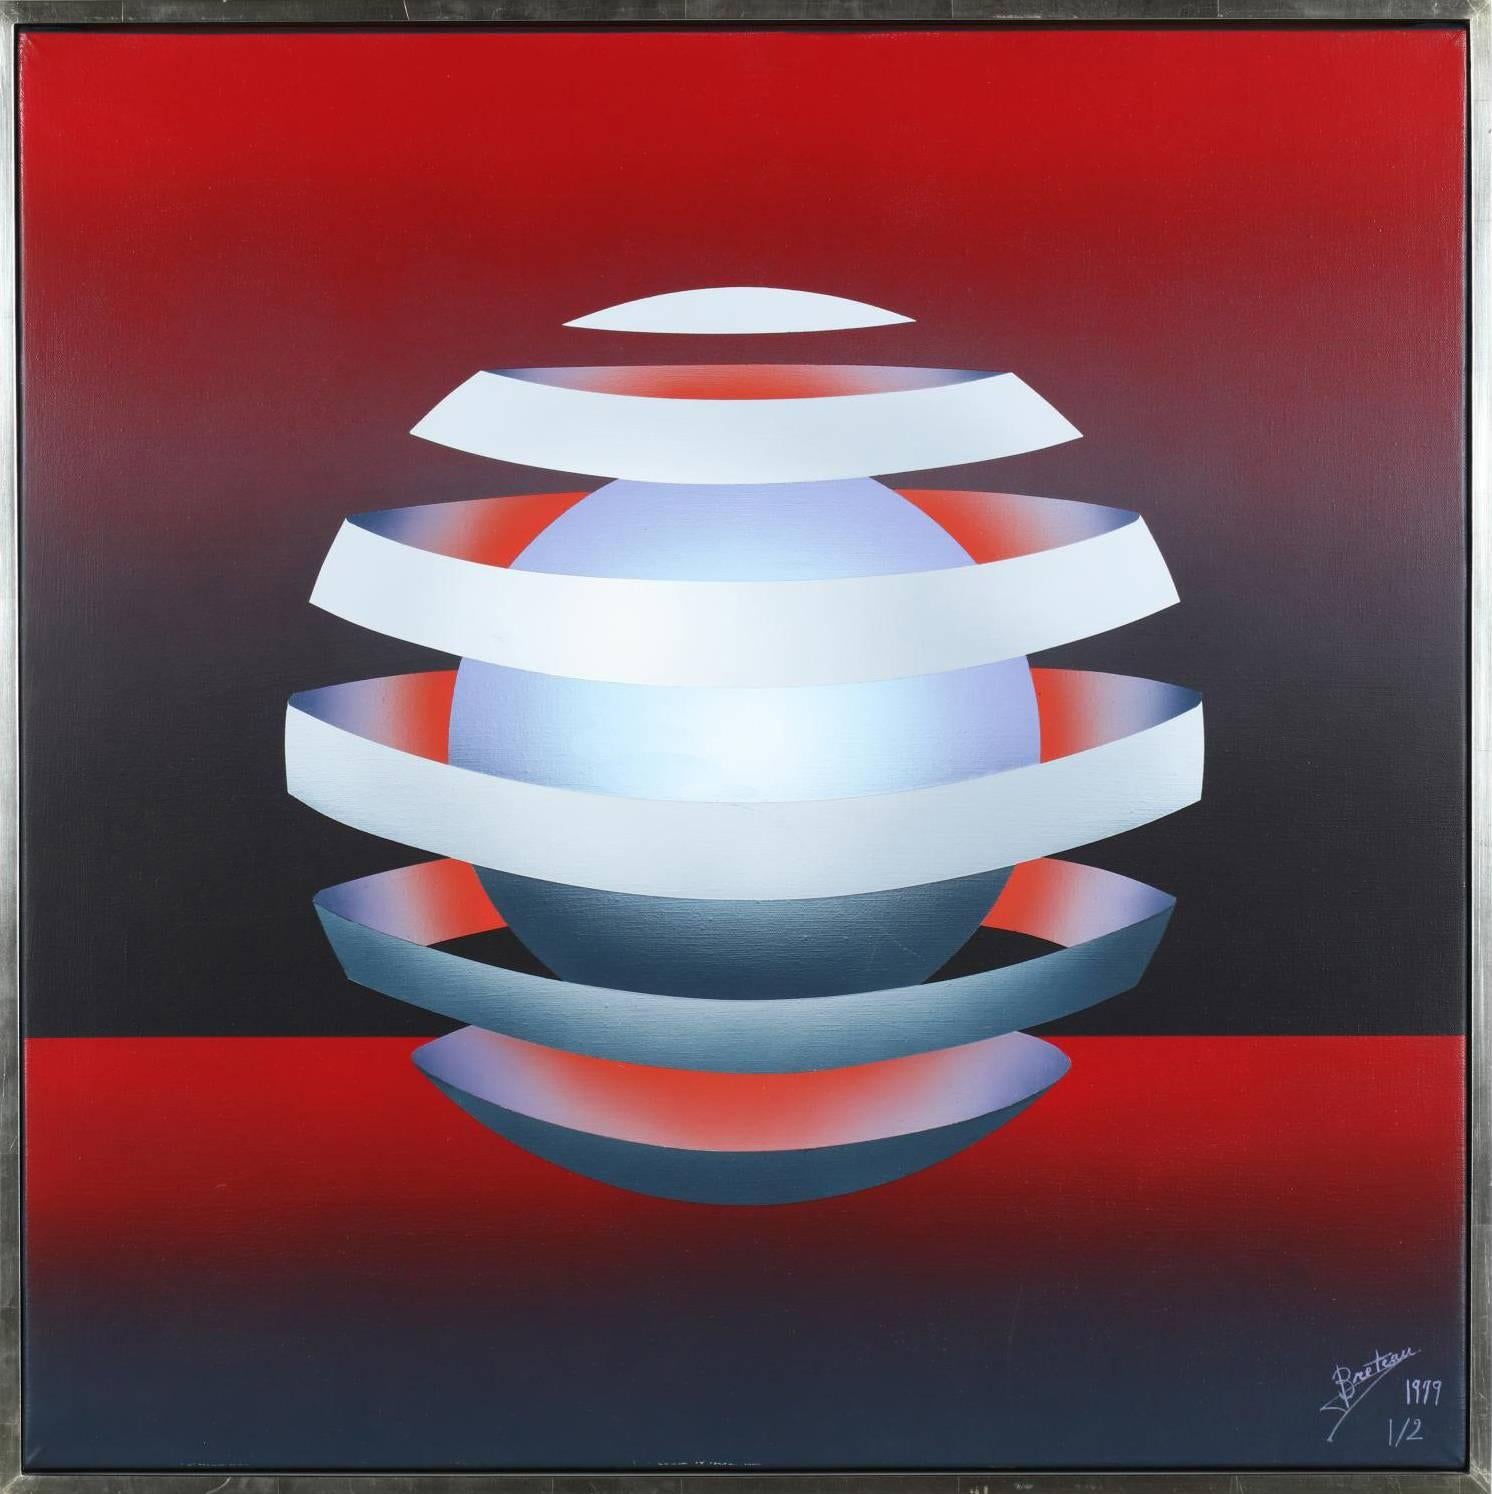 Sphere 1, Geometric Abstract Acrylic Painting on Canvas by Patrice Breteau